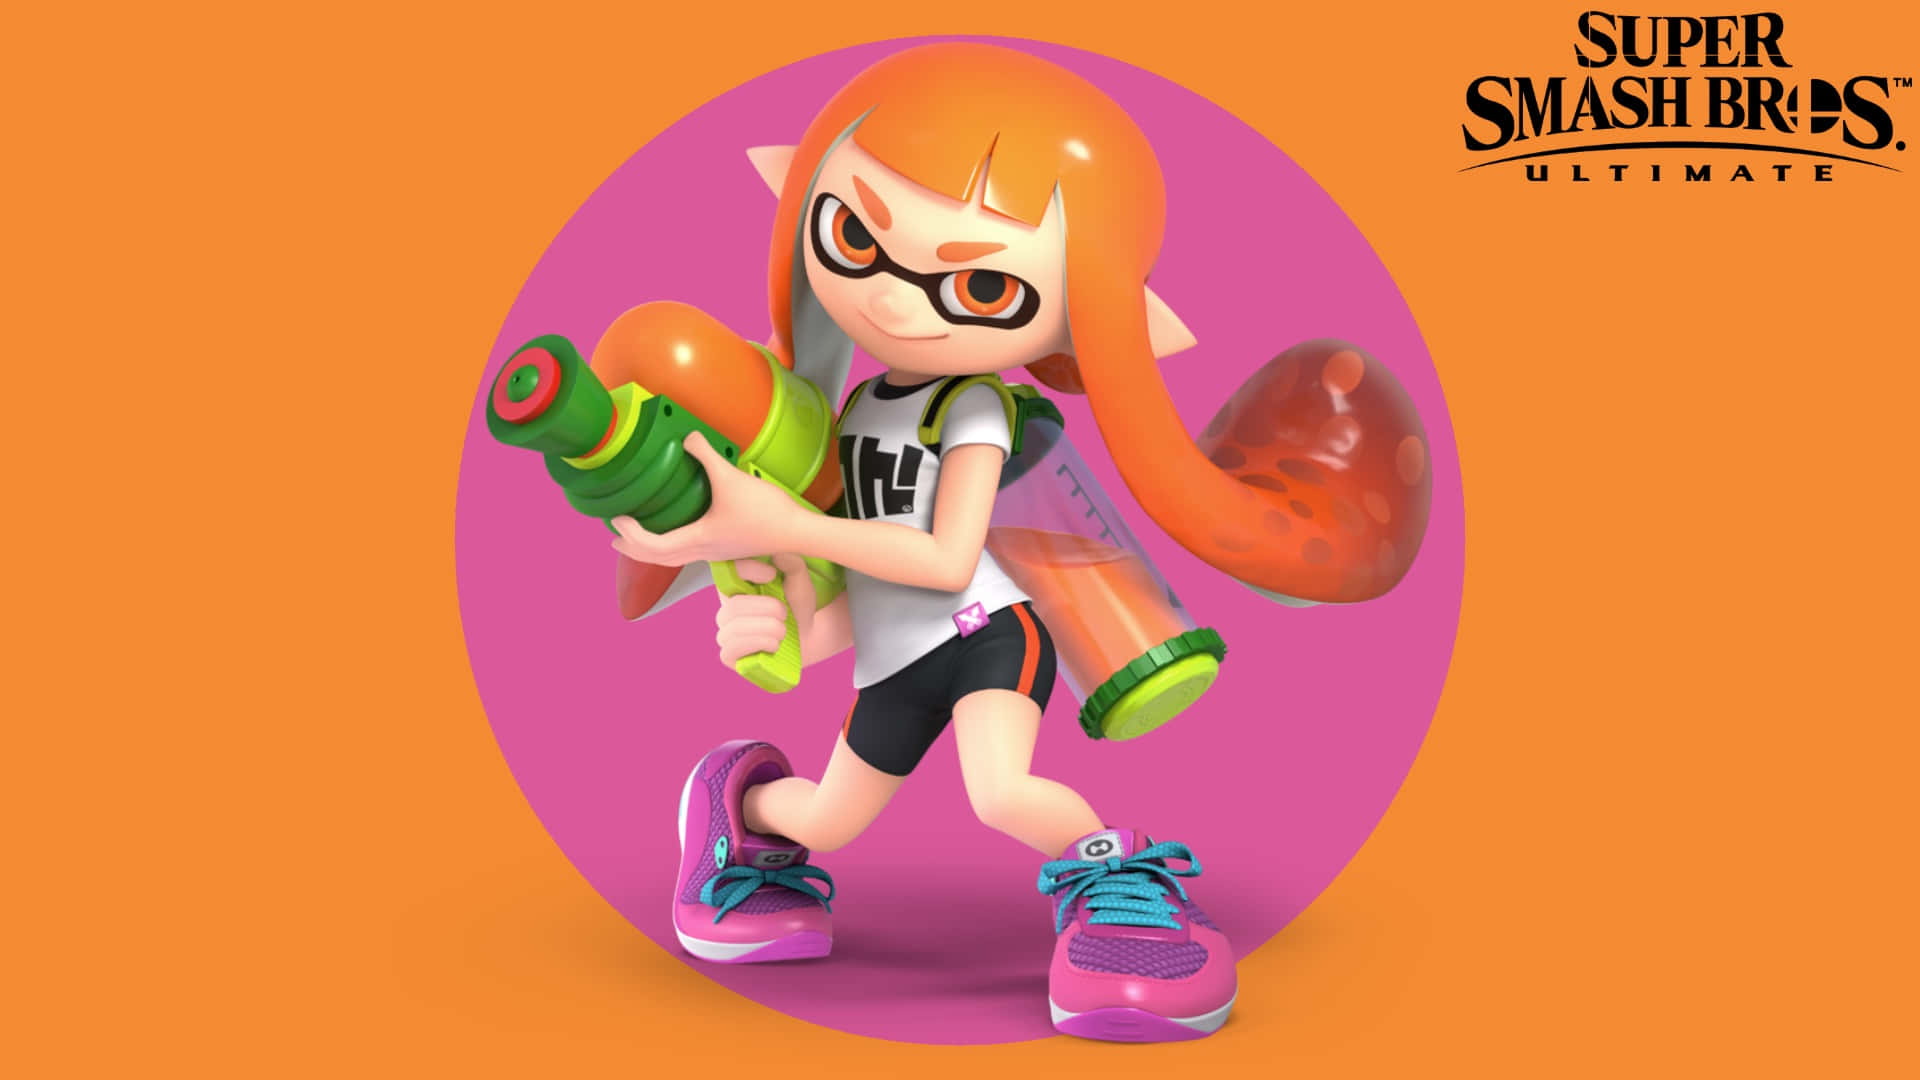 Unmasked Character in Splatoon Video Game